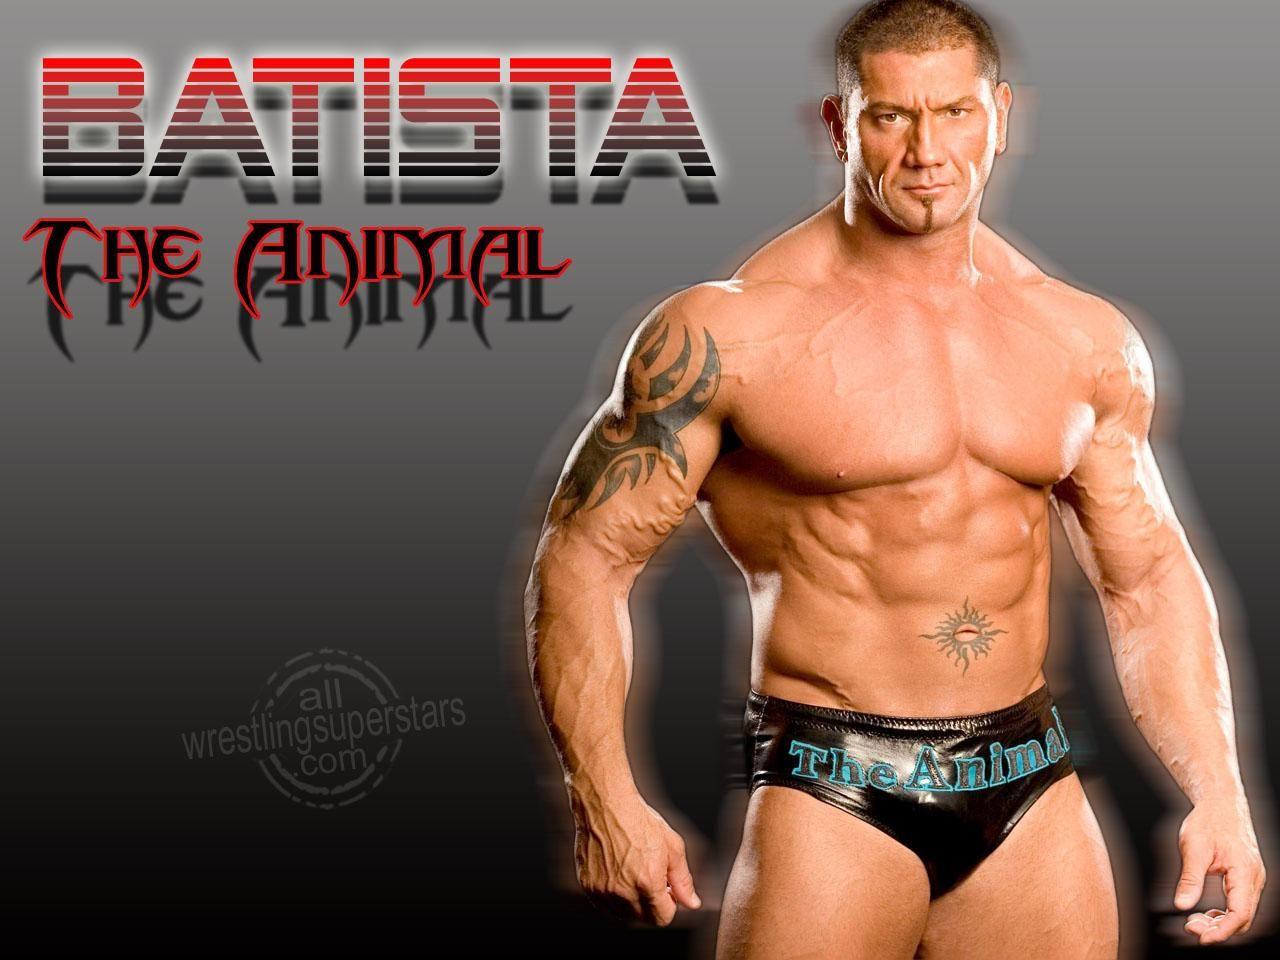 WWE BATISTA WALLPAPER free download for your mobile